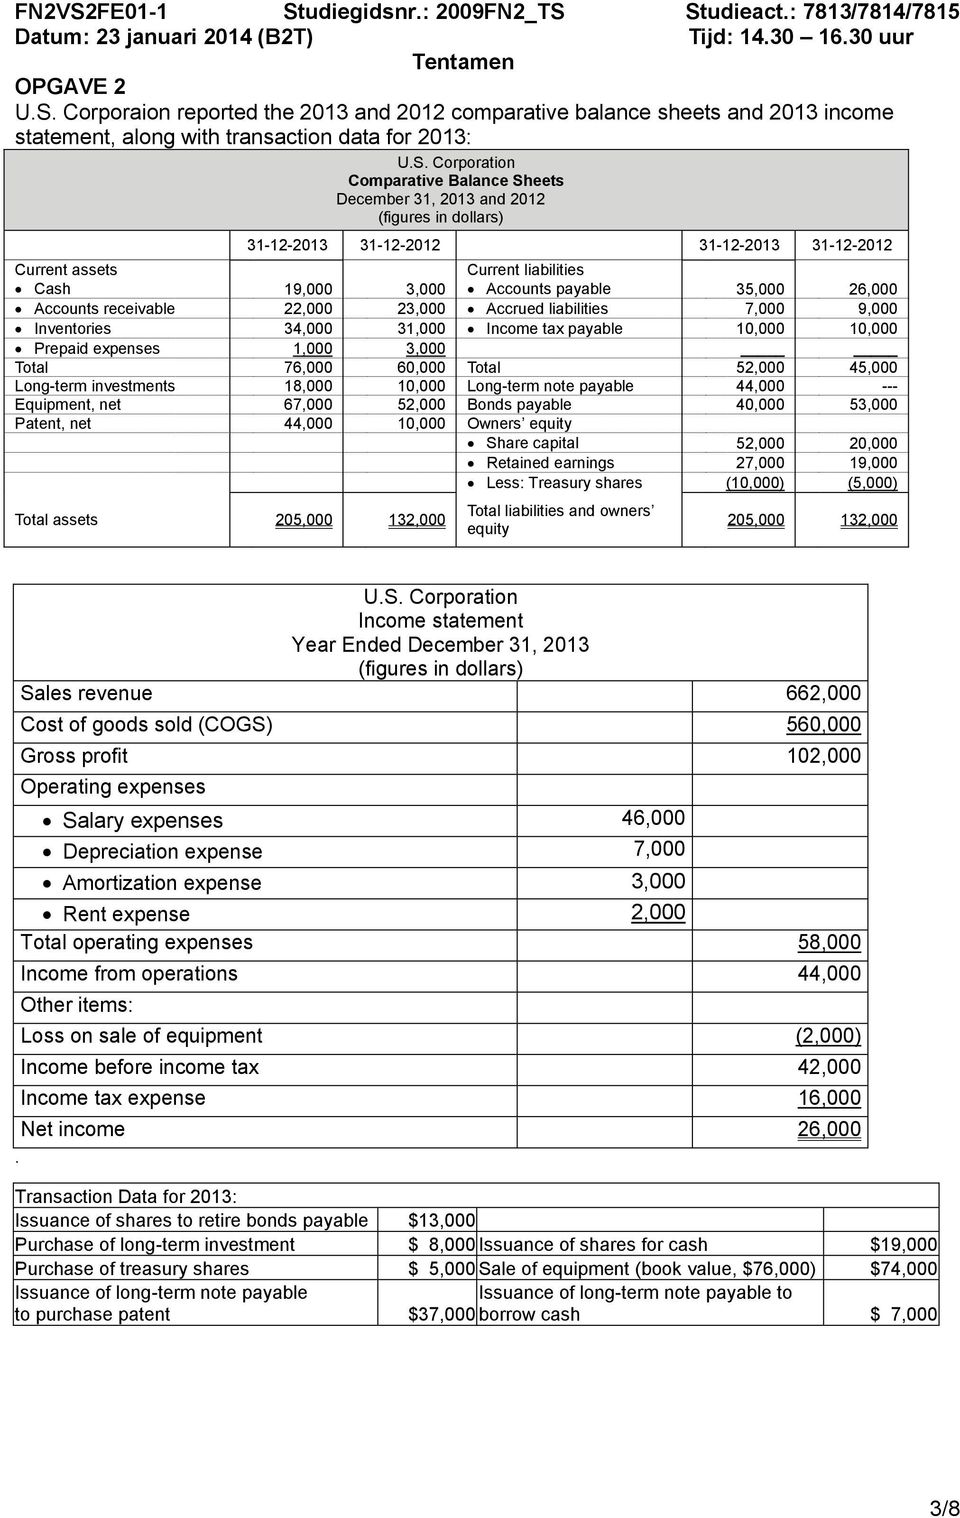 Corporation Comparative Balance Sheets December 31, 2013 and 2012 (figures in dollars) 31-12-2013 31-12-2012 31-12-2013 31-12-2012 Current assets Current liabilities Cash 19,000 3,000 Accounts